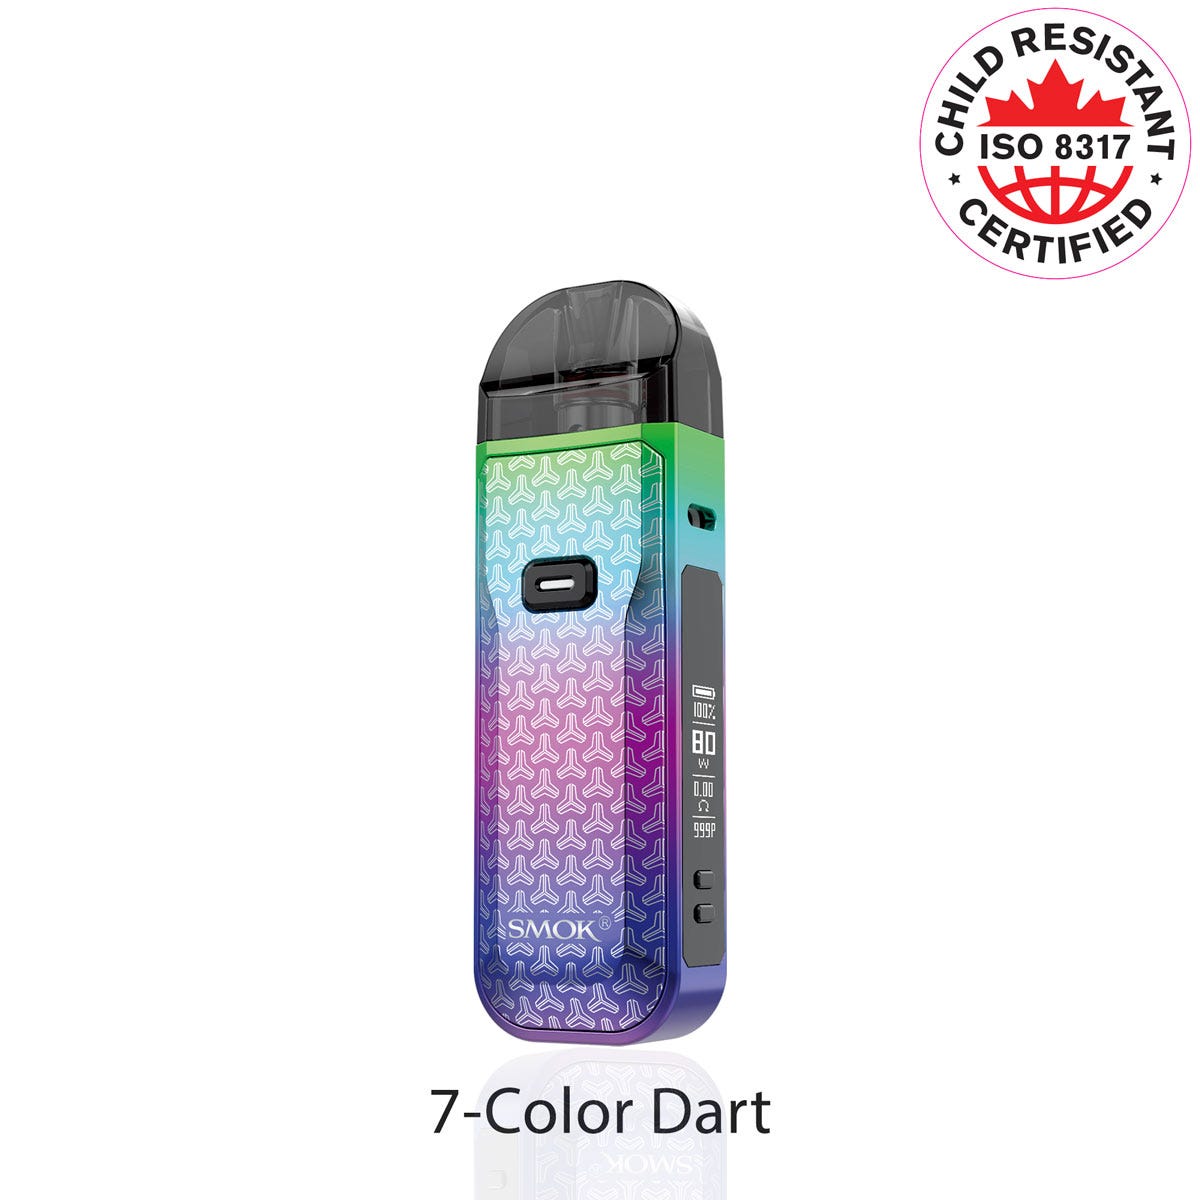 Smok Nord 5 80W Pod Kit in 7 color dart combination